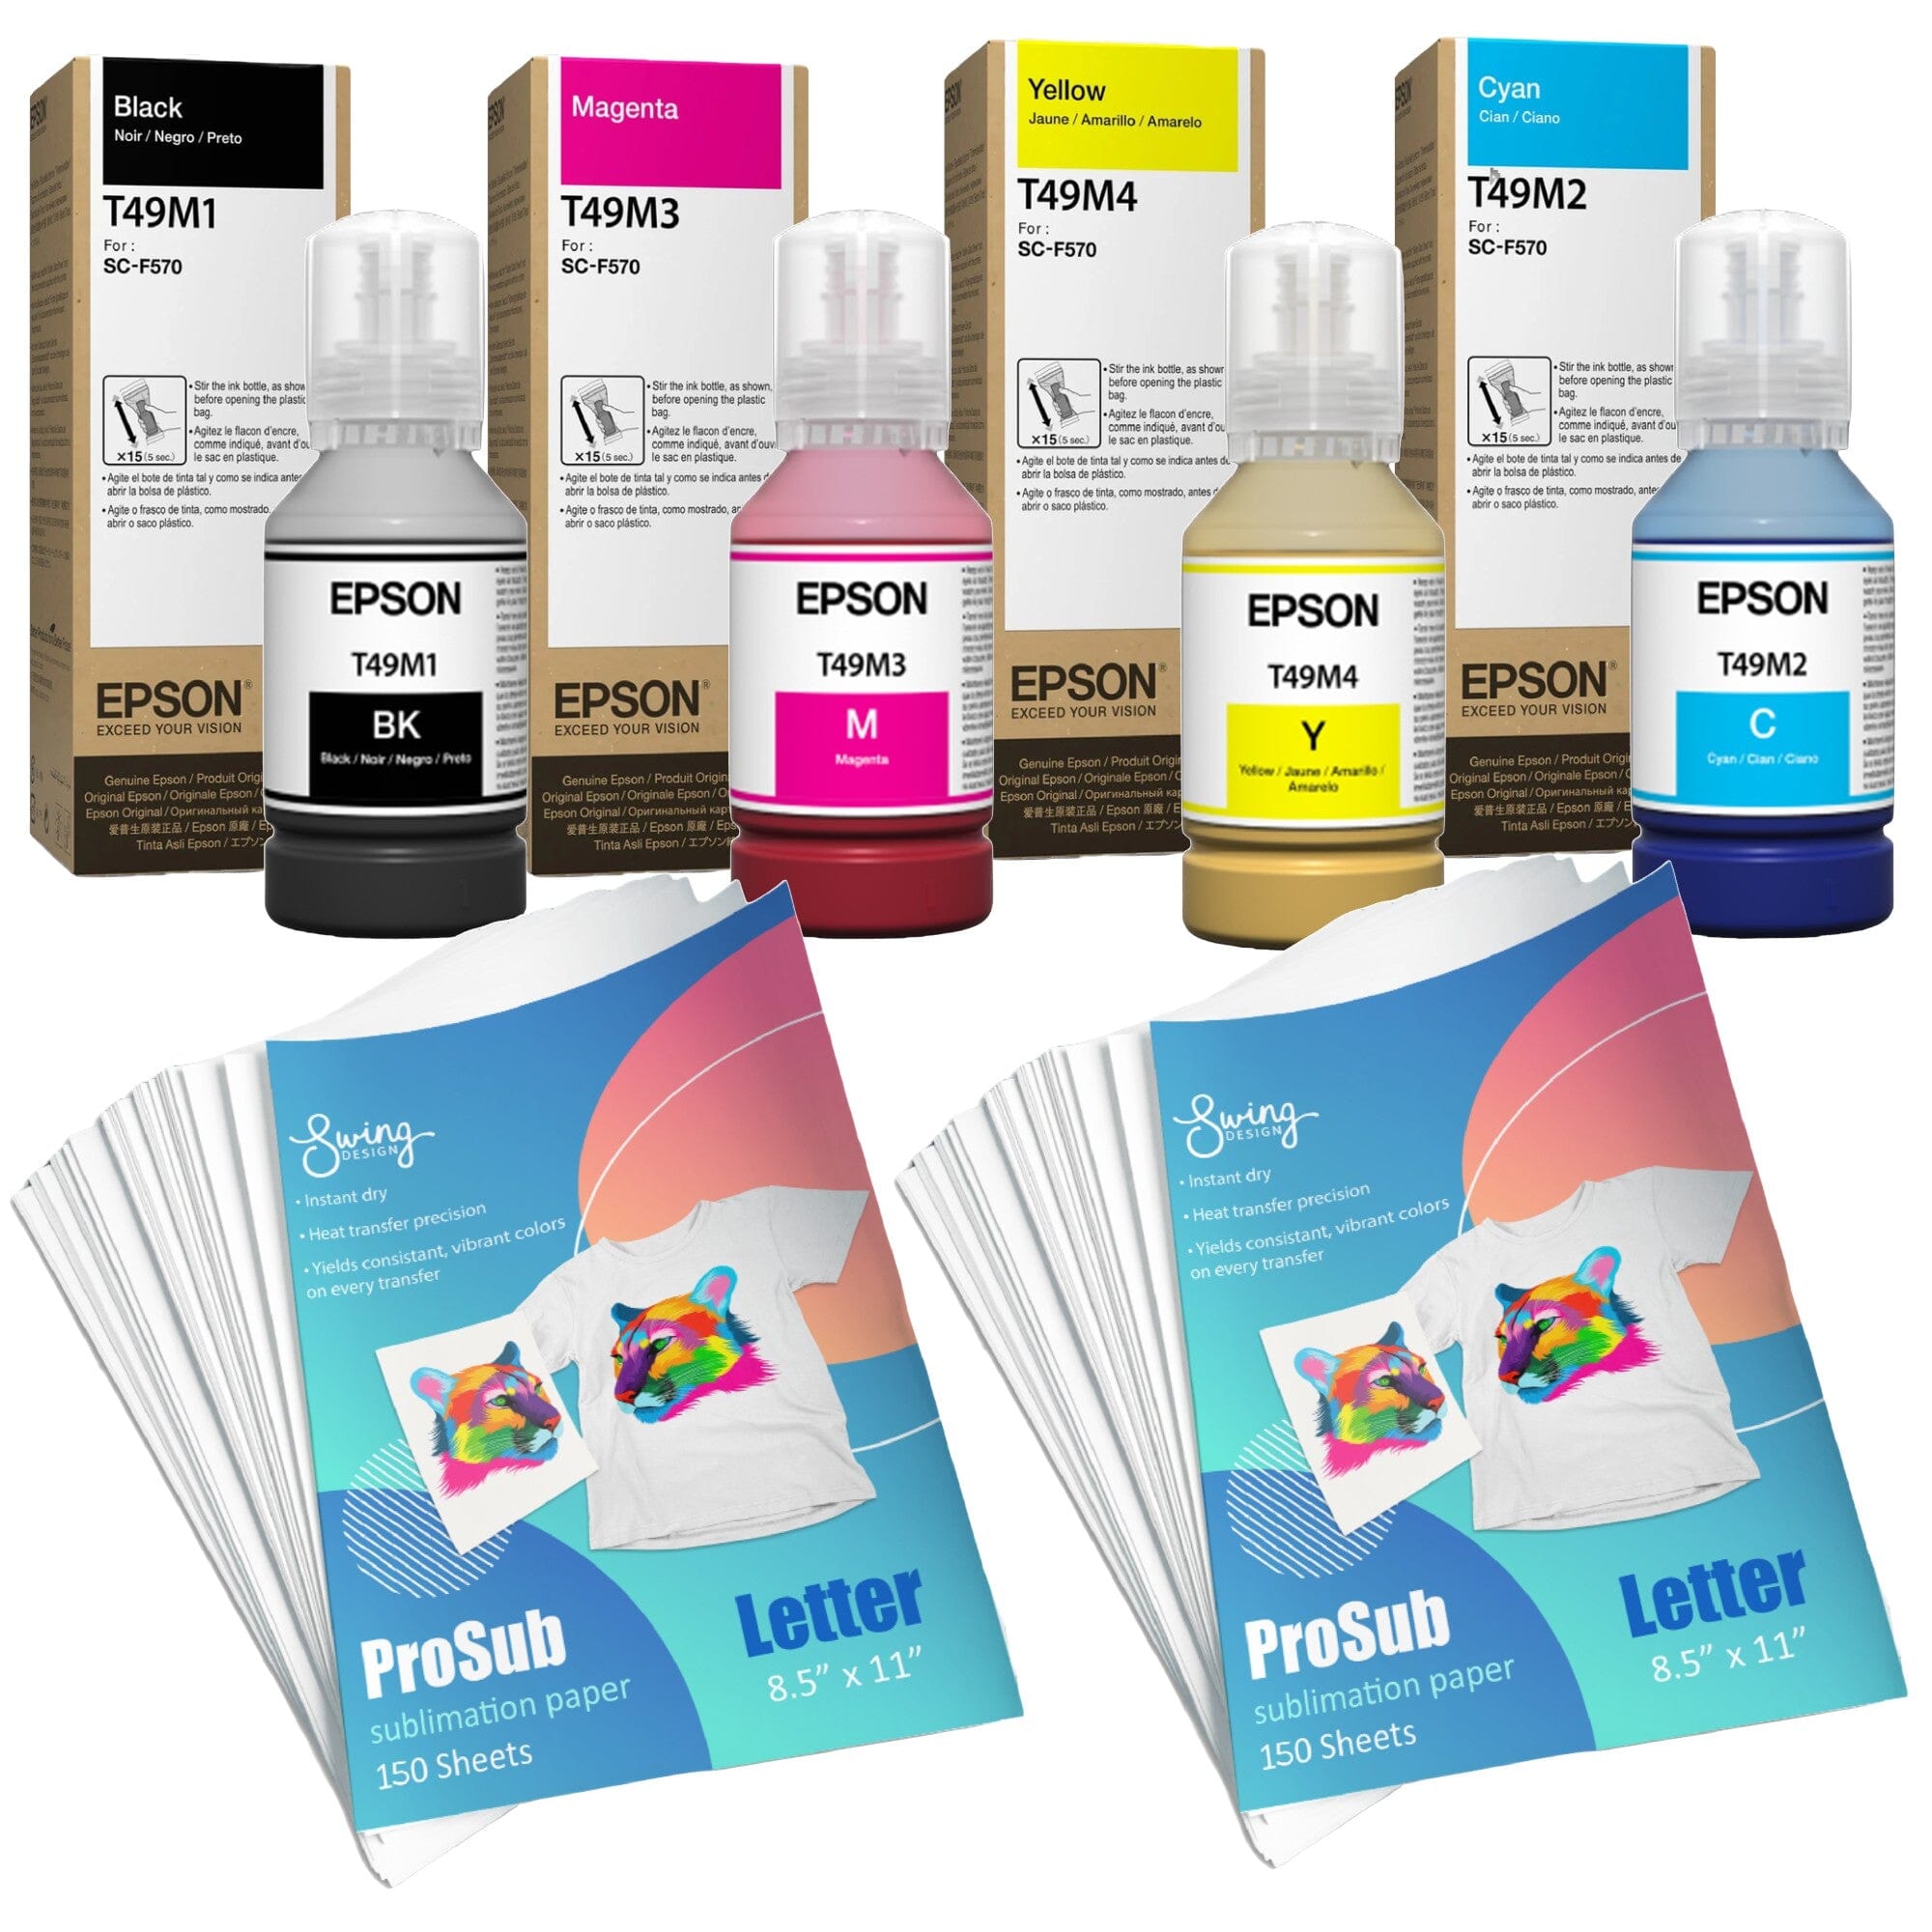 Epson F570 DS Transfer Multi Use Paper 8.5 x 11 - 200 Sheets